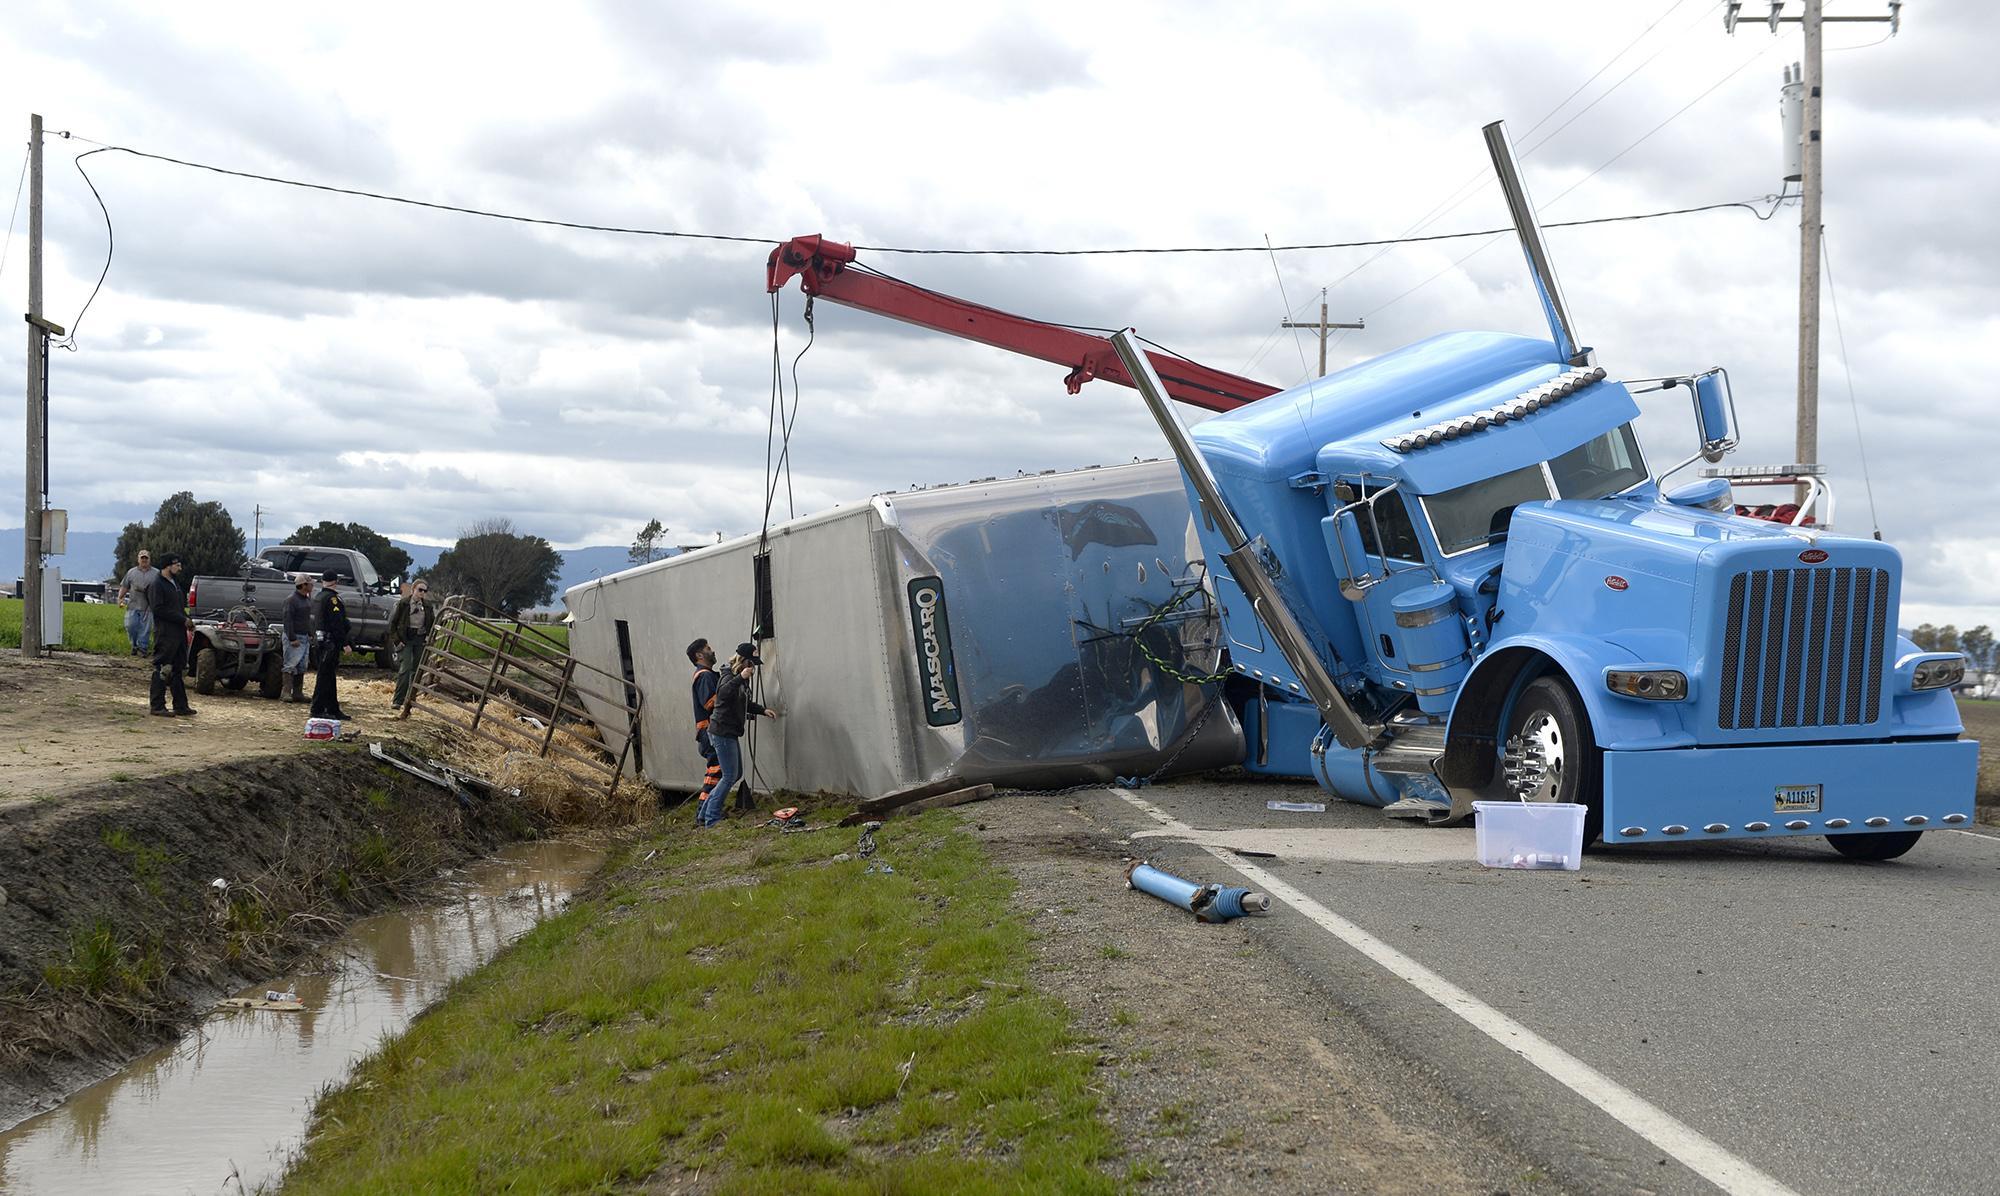 Overloaded Truck Accidents